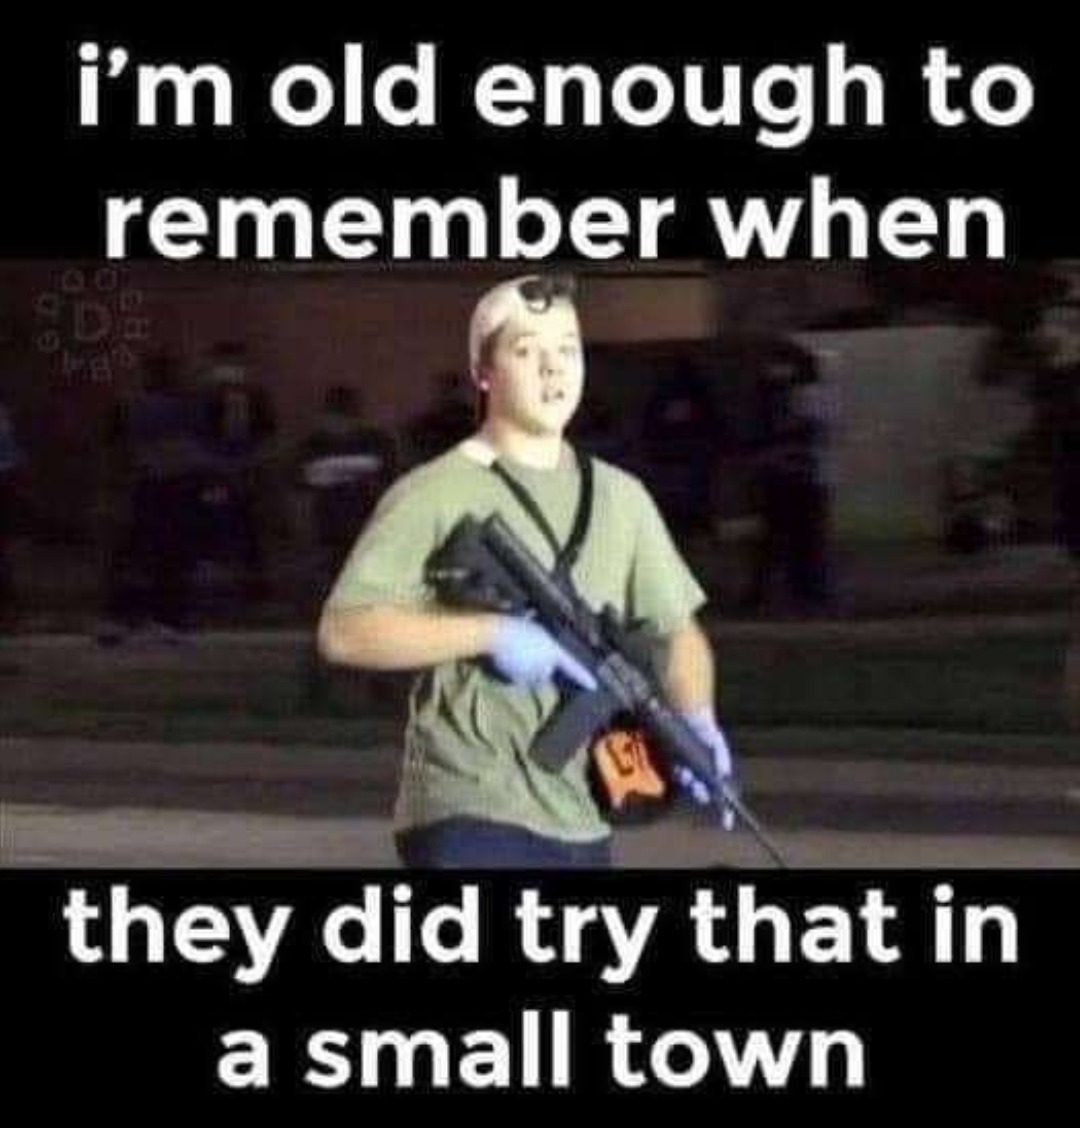 Try that in a small town - meme